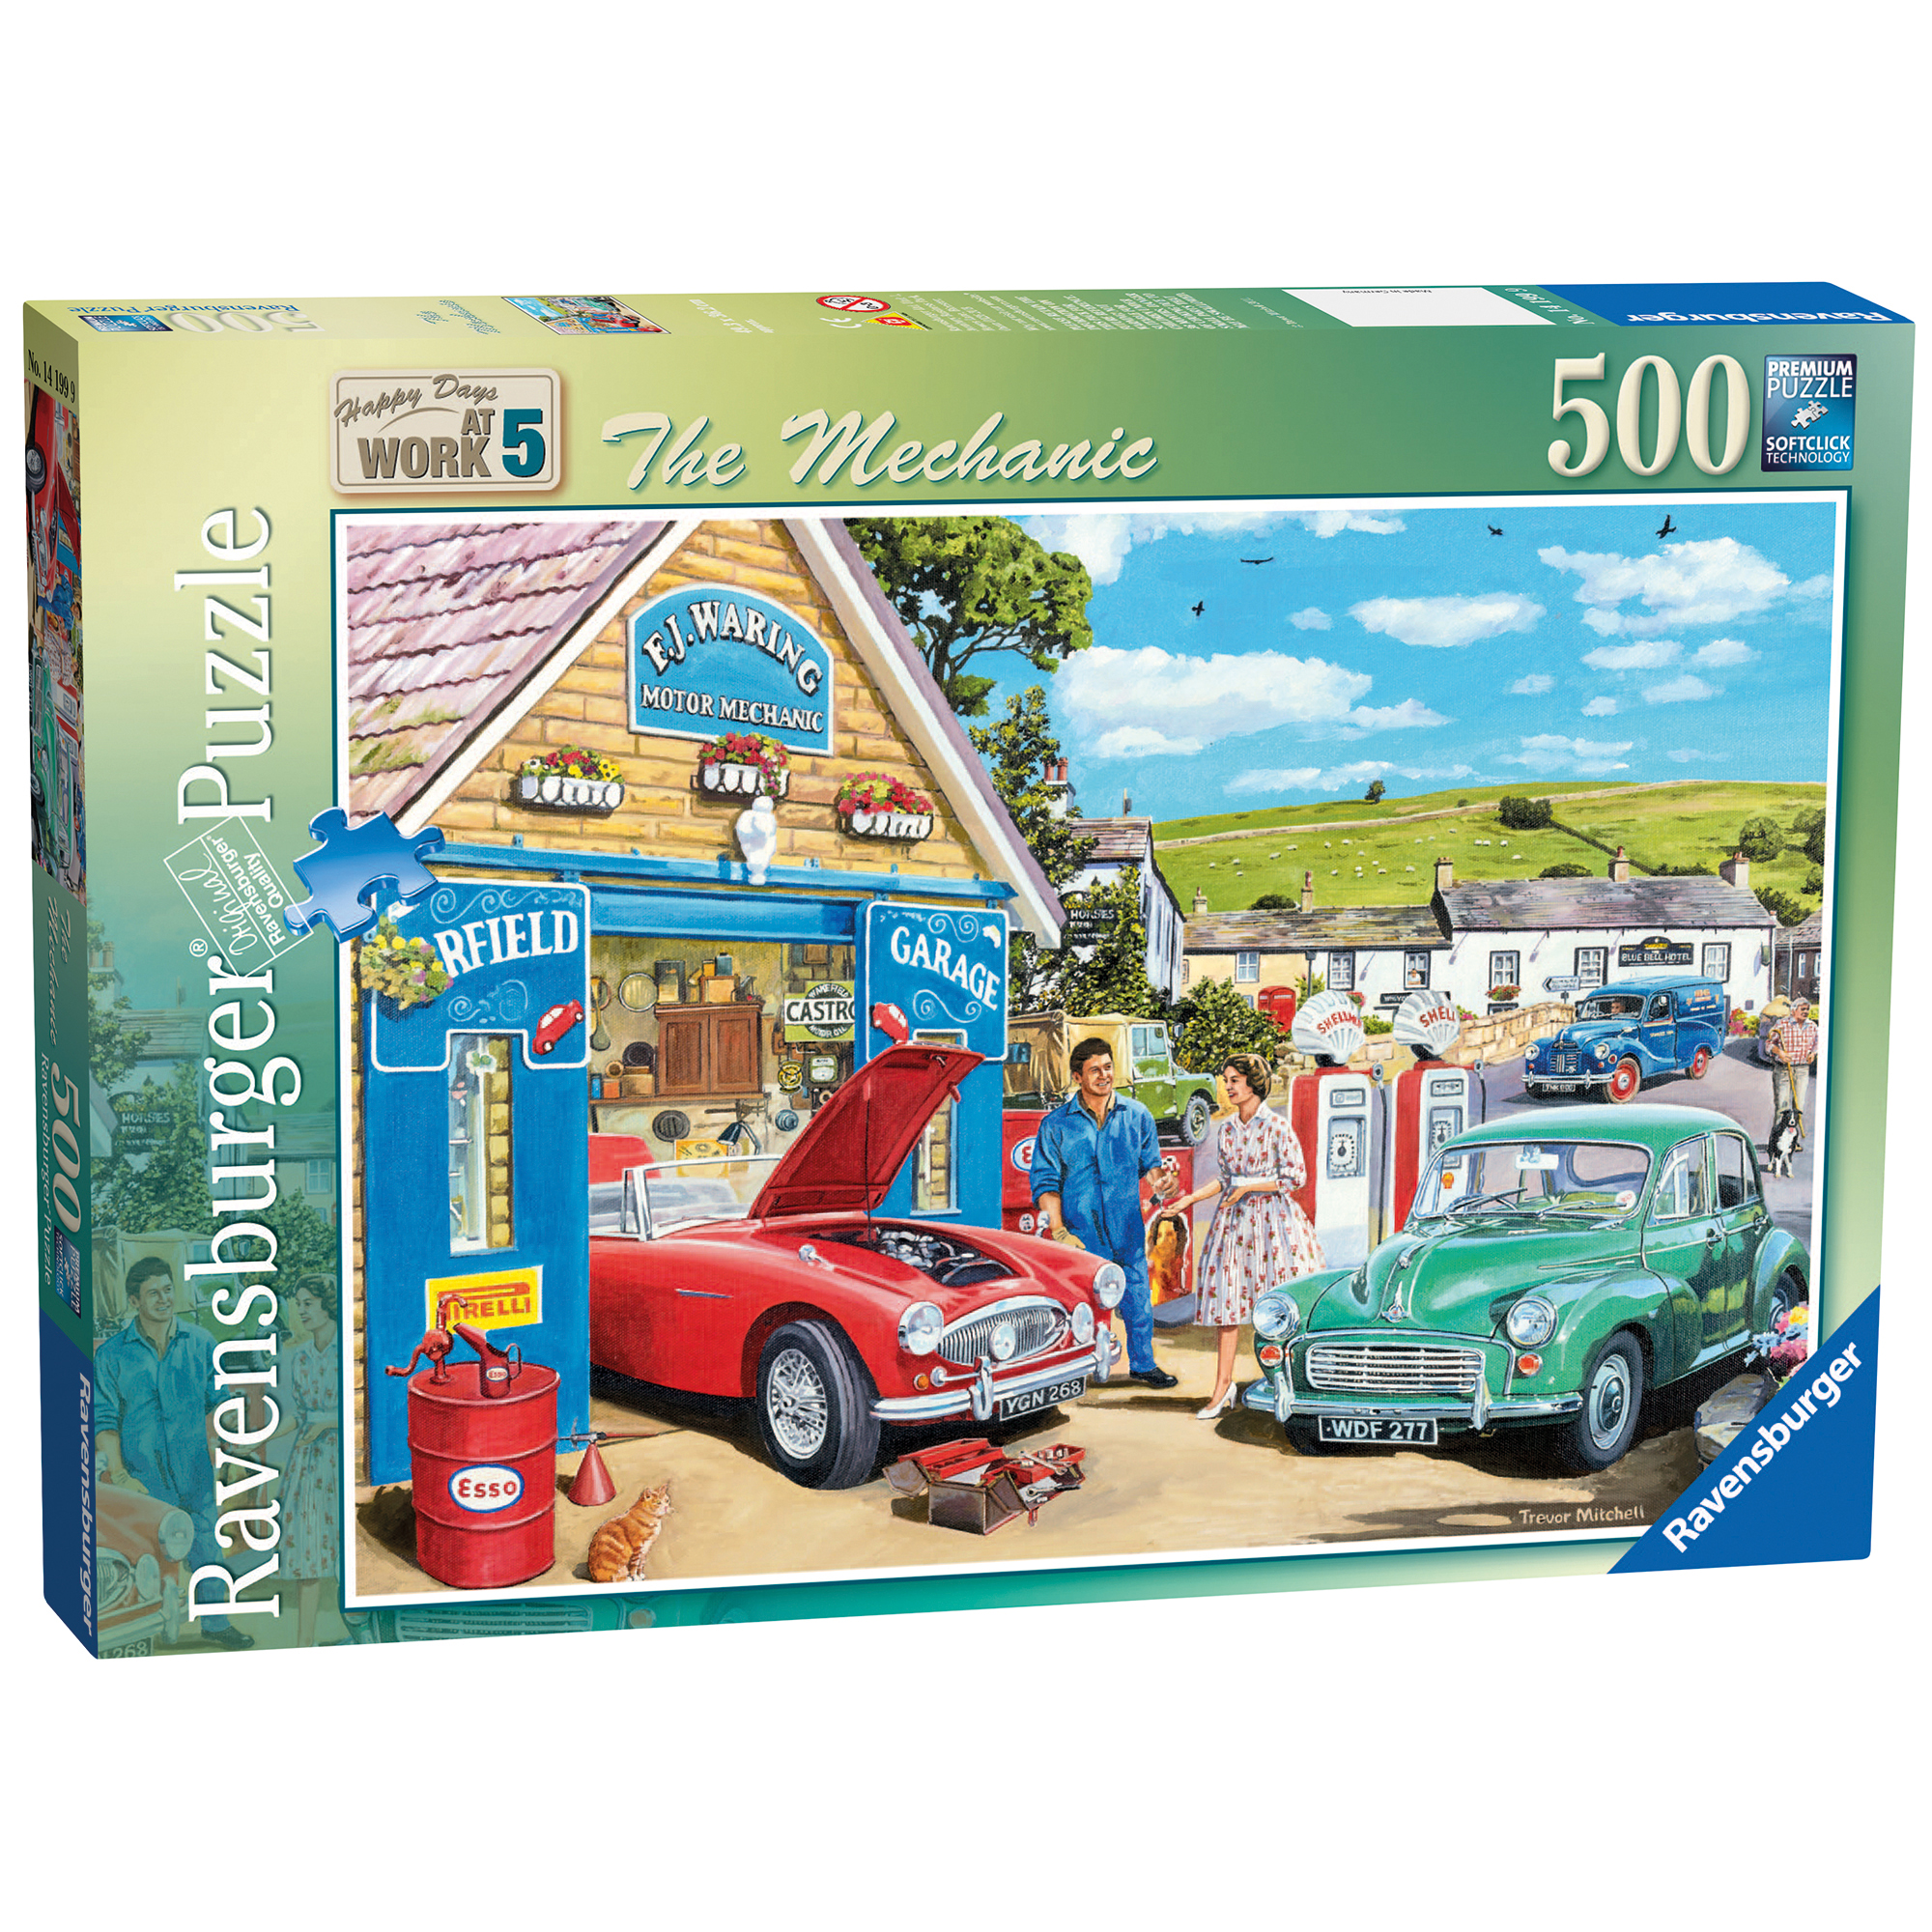 Happy Days at Work 500 Piece Puzzle - The Mechanic